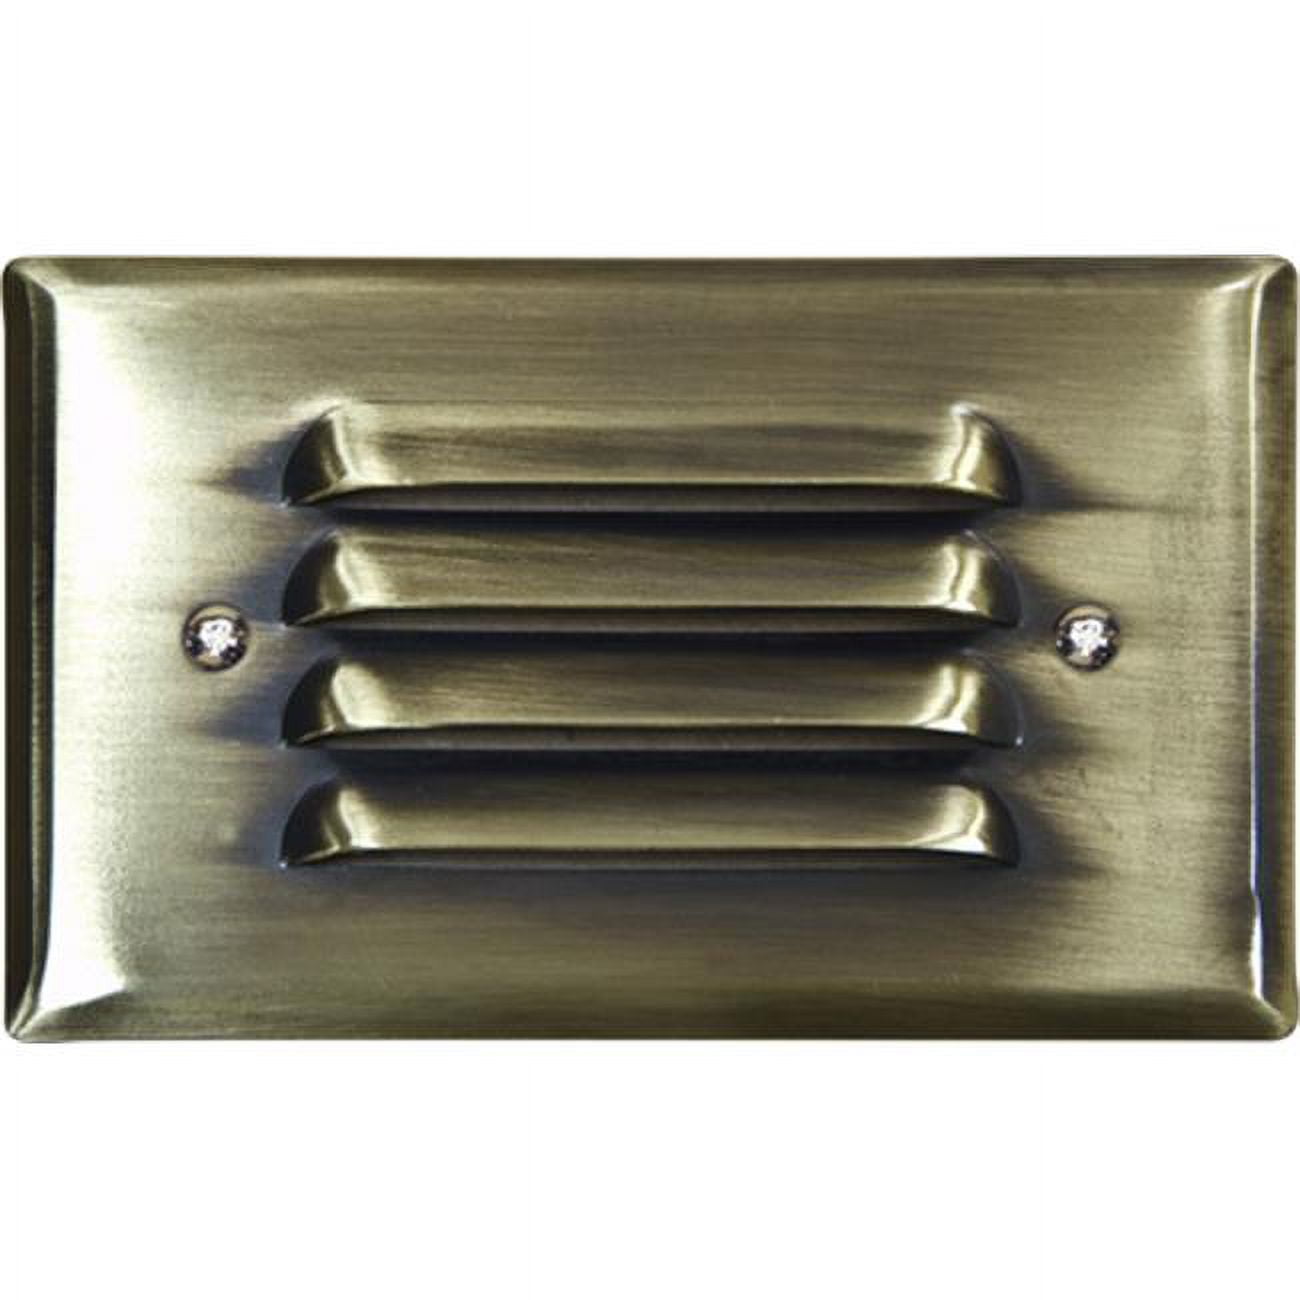 Picture of Dabmar Lighting LV617-ABS Brass Recessed Louvered Brick, Step & Wall Light, Antique Brass - 1.95 x 4.83 x 3.10 in.